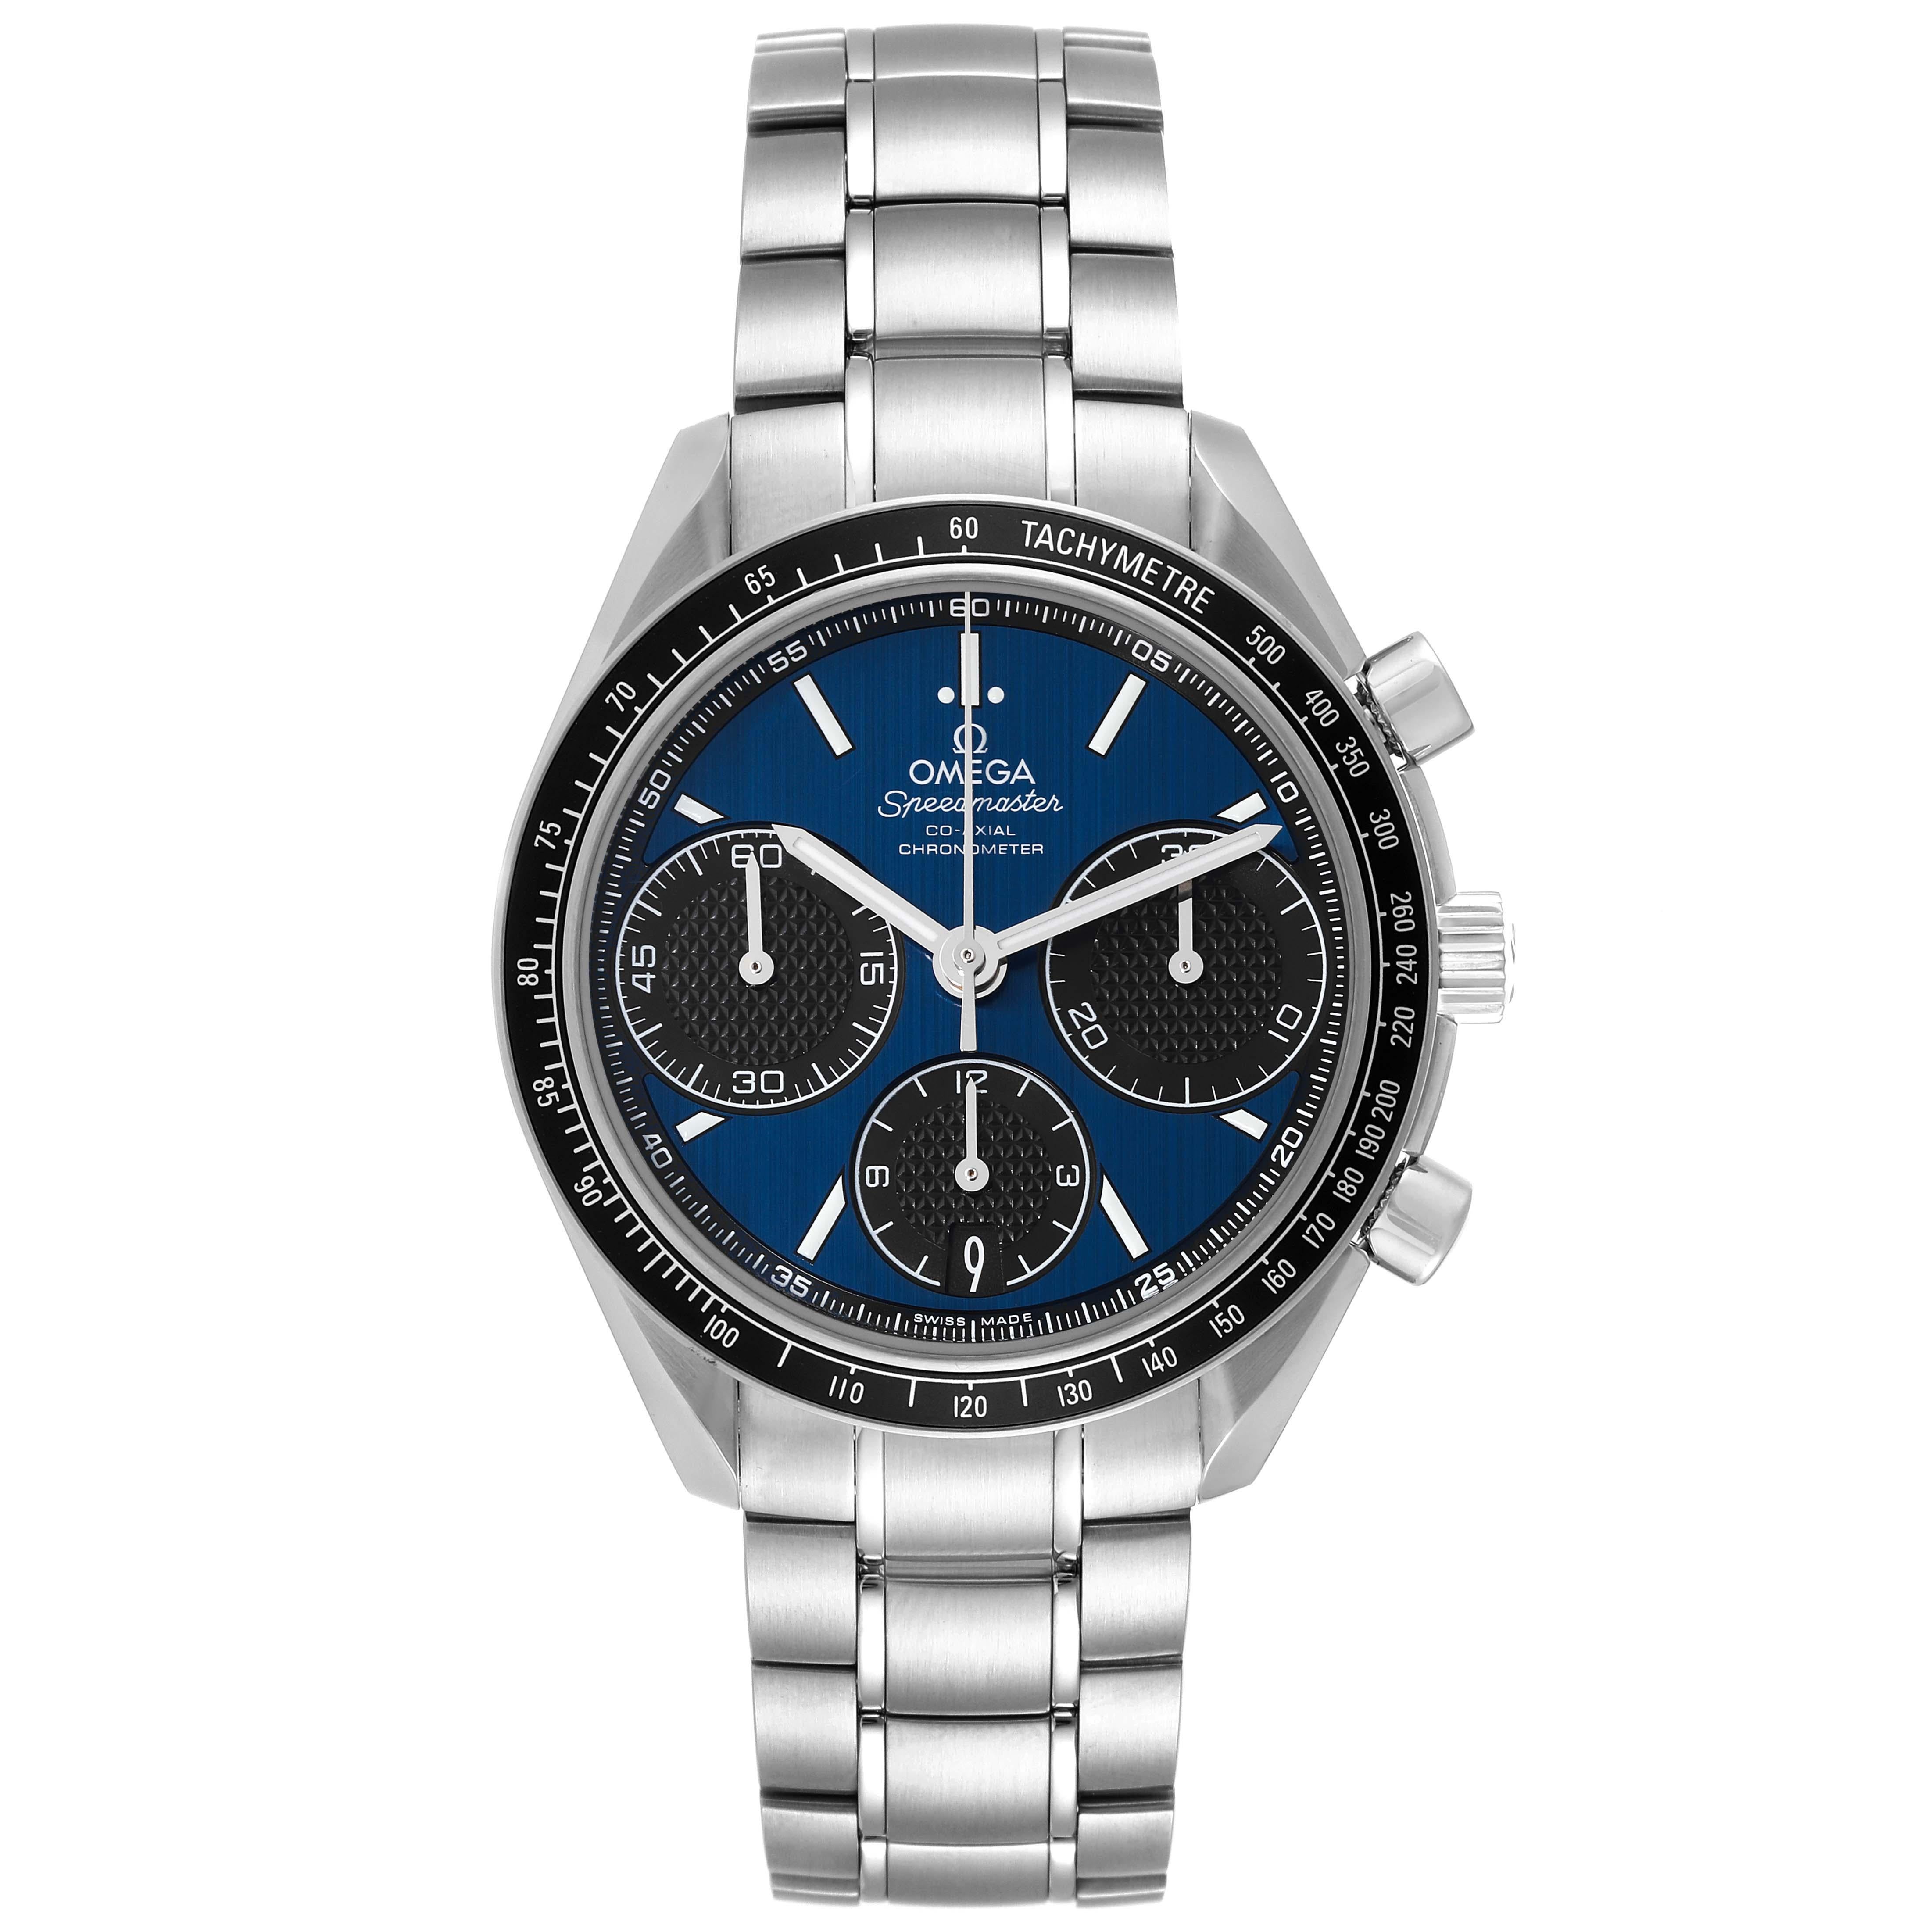 Omega Speedmaster Racing Blue Dial Steel Mens Watch 326.30.40.50.03.001 Box Card. Automatic Self-winding chronograph movement with column-wheel mechanism and Co-Axial escapement. Free sprung-balance equipped with Si14 silicon balance spring.